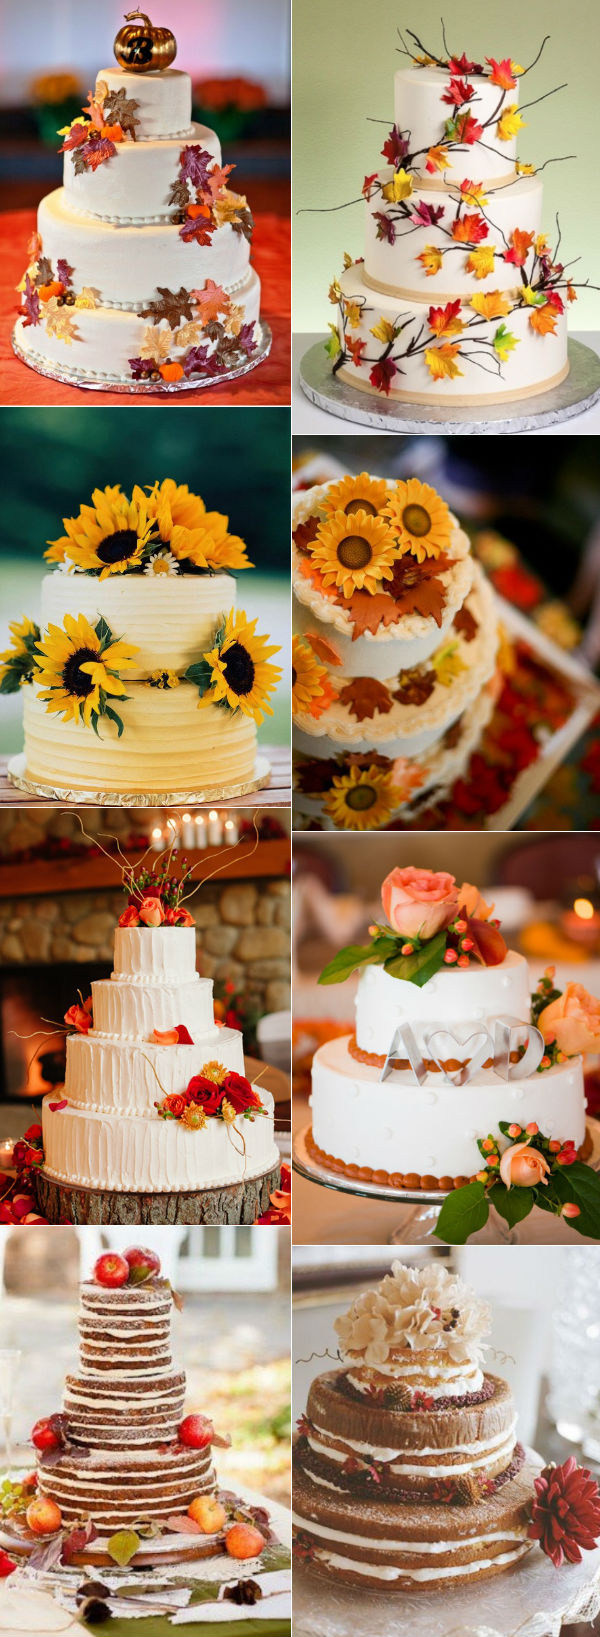 Fall Wedding Cakes Pictures
 31 Beautiful Naked Wedding Cake Ideas For 2016